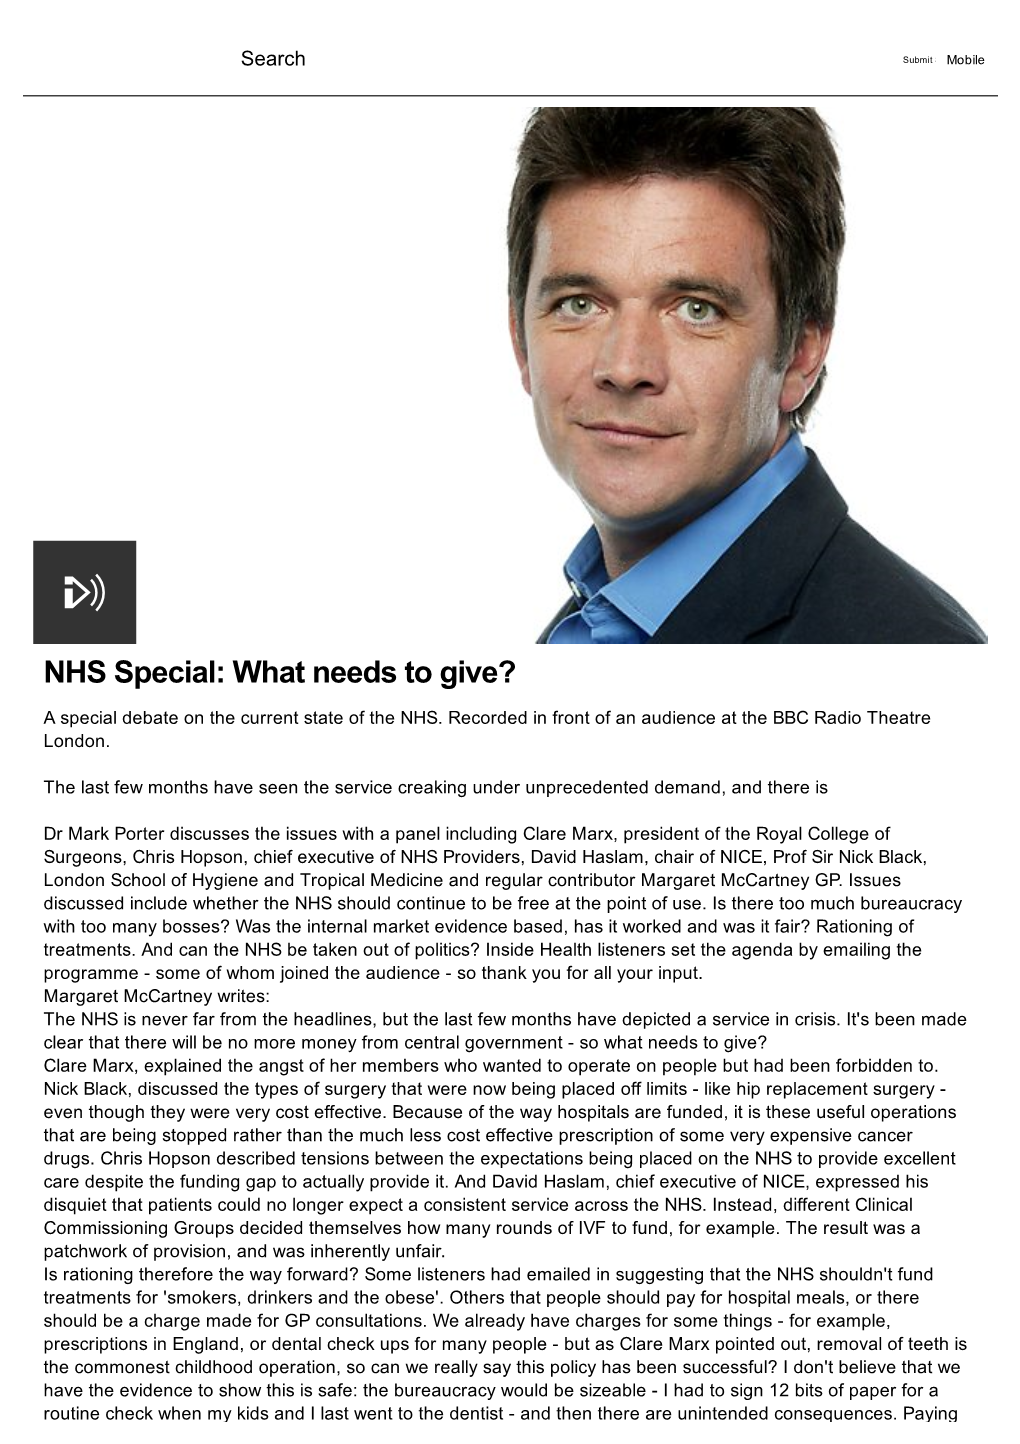 NHS Special: What Needs to Give?